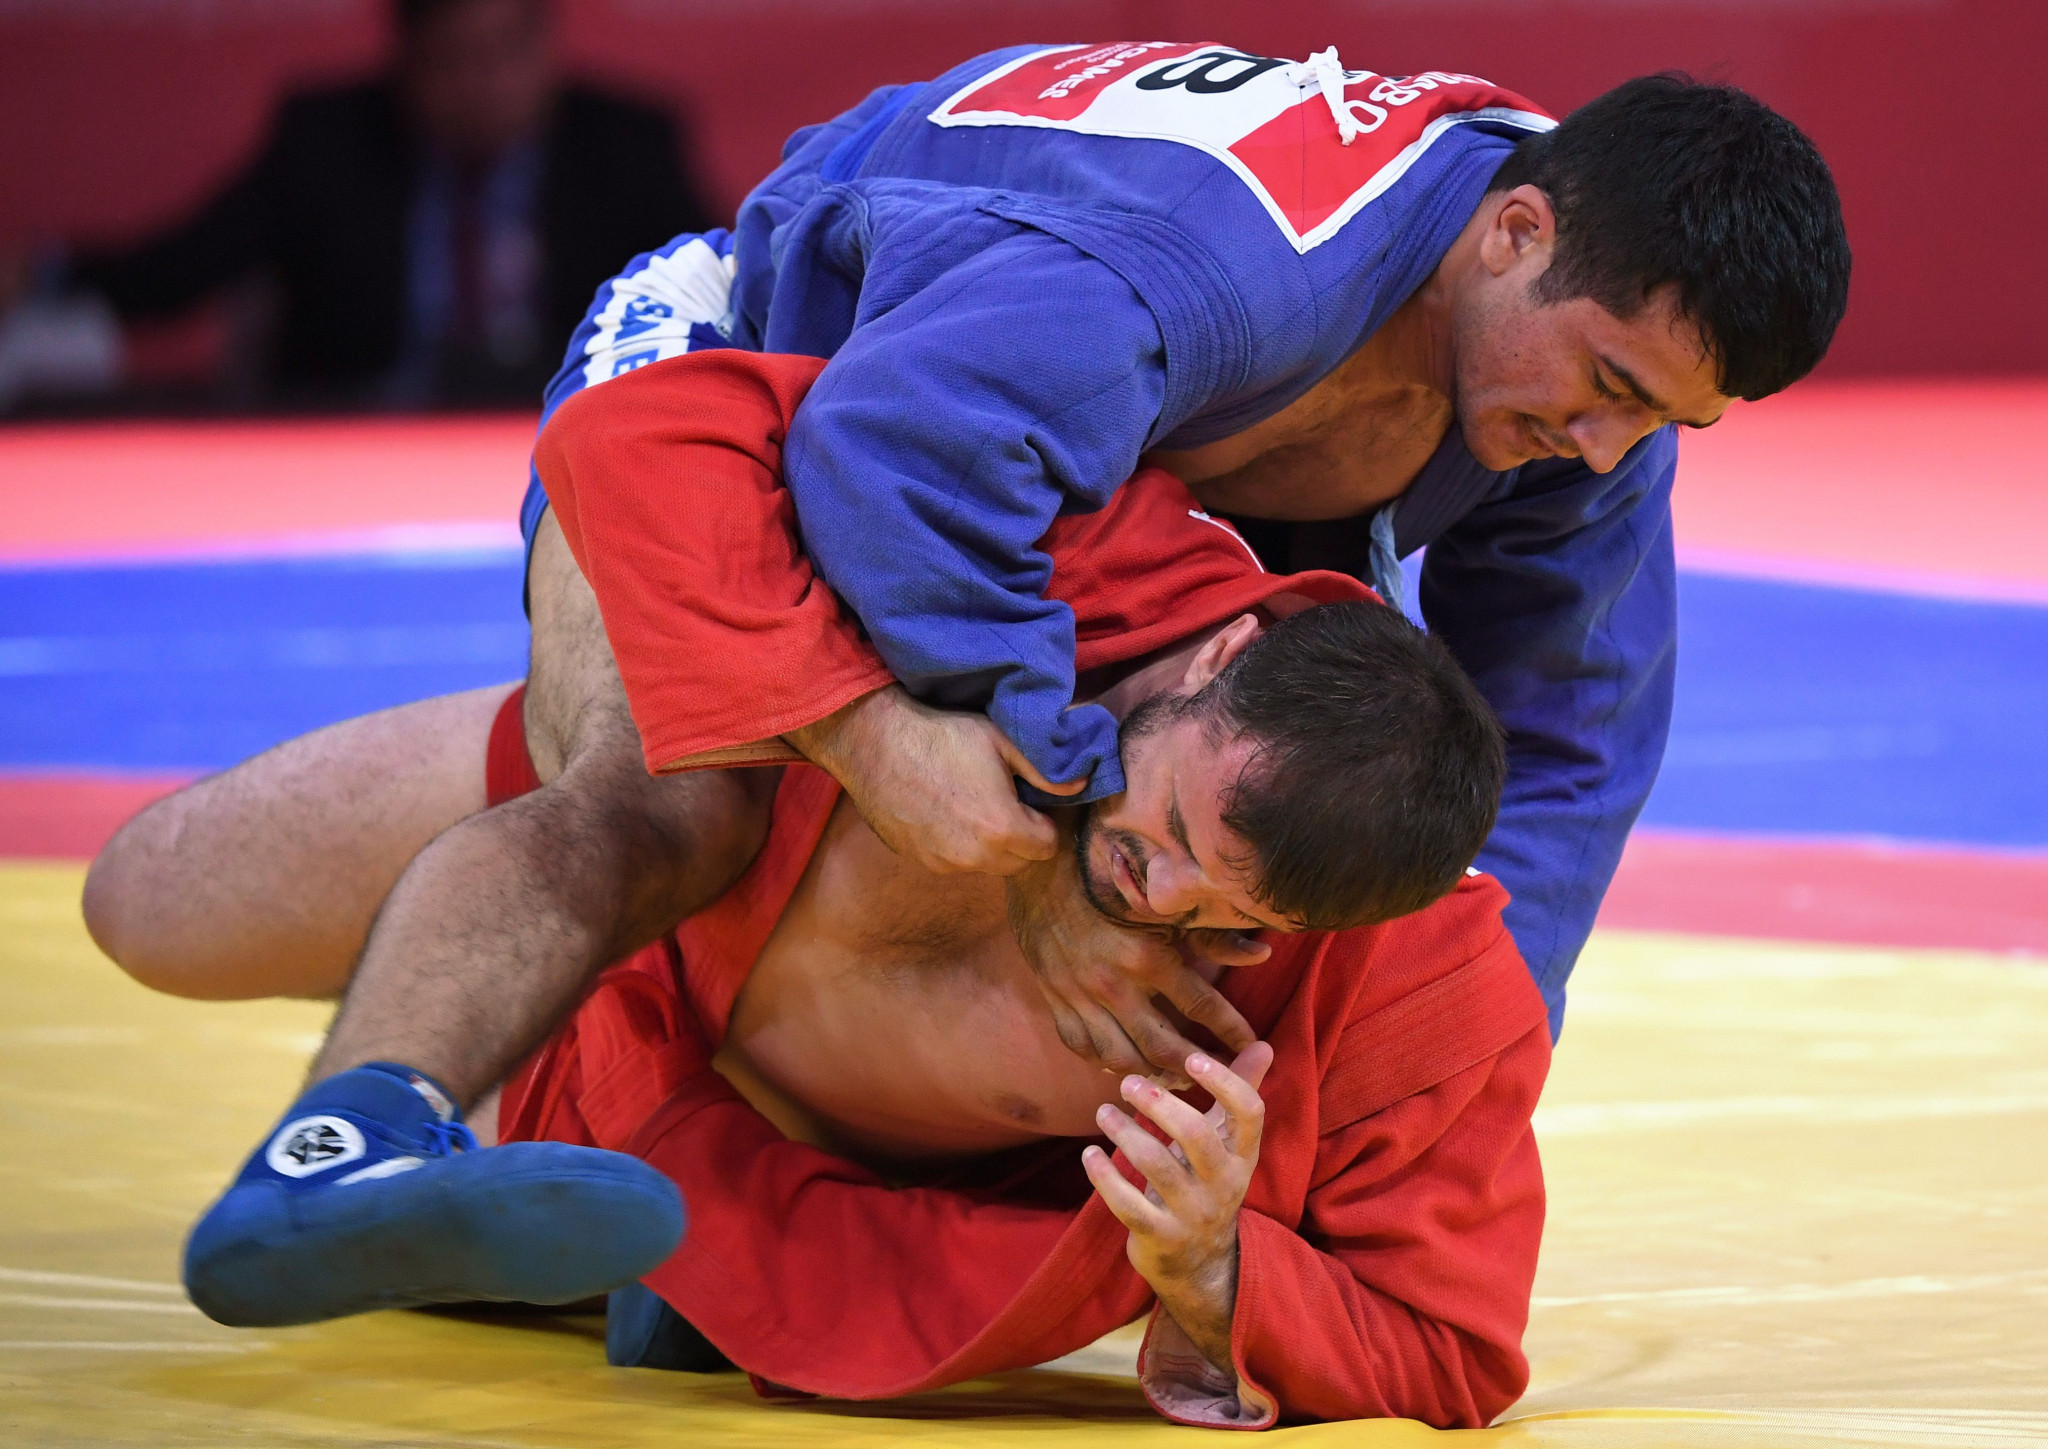 Sambo featured at the Asian Games, the world's second largest multi-sport event, for the first time this year  ©FIAS